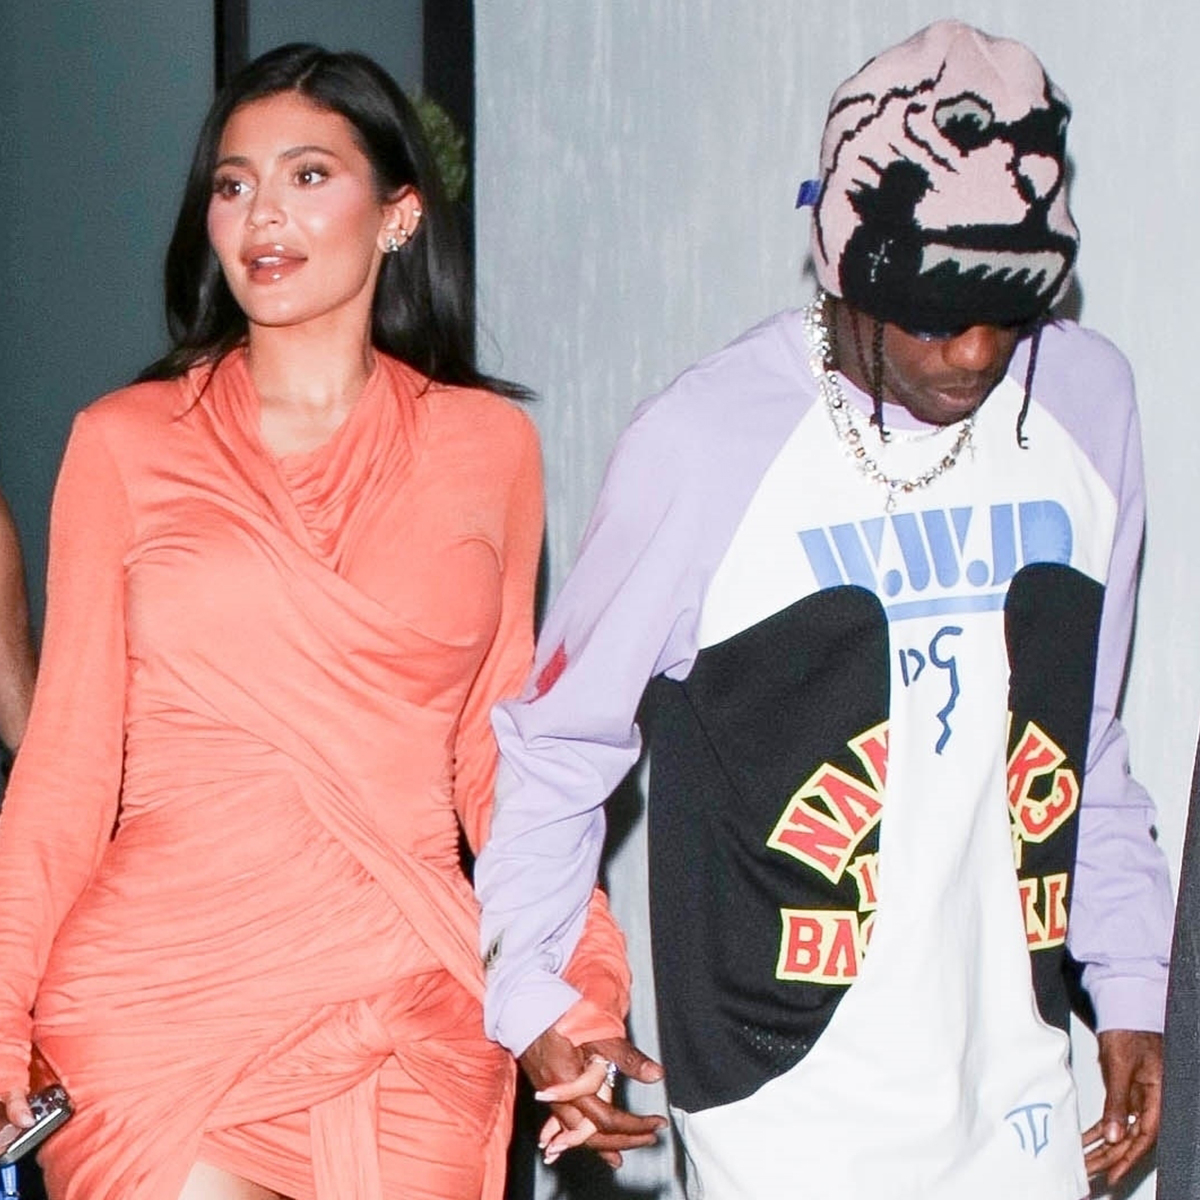 Kylie Jenner Showcases Vibrant Style on Date With Travis Scott